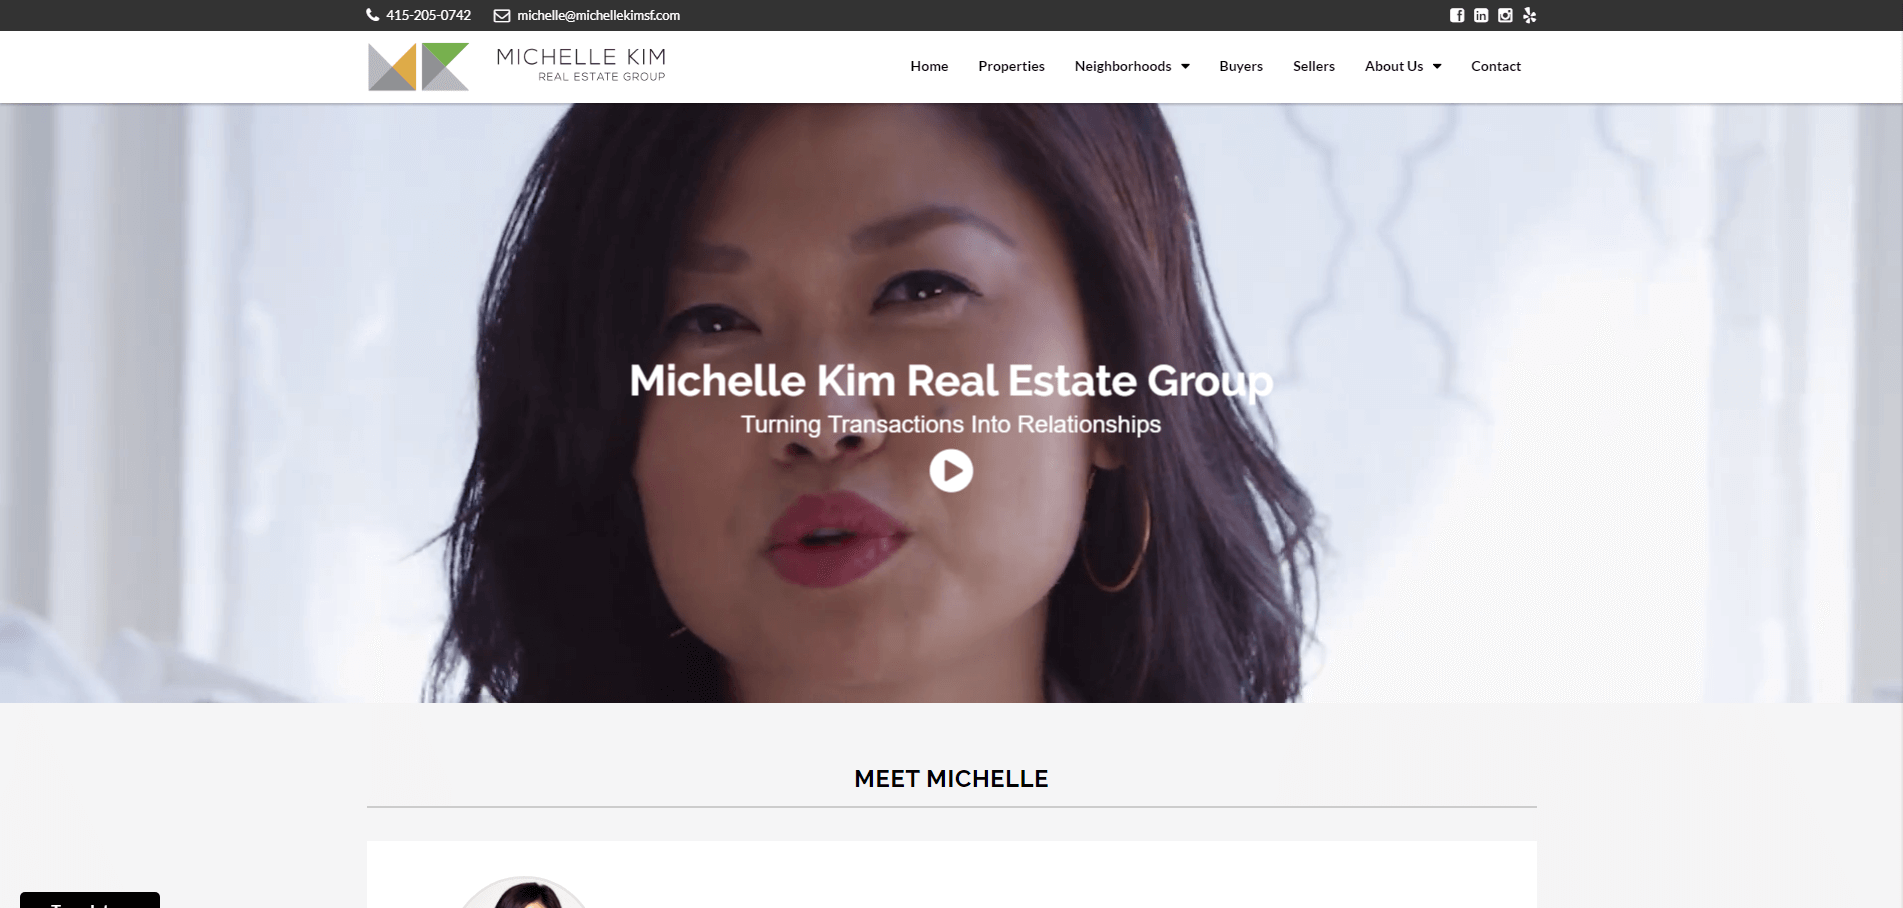  We made a list of the 101 best real estate websites.  We ranked each site 1-101 and reviewed them all.  Here's michellekimsf.com.  Who made the cut? 